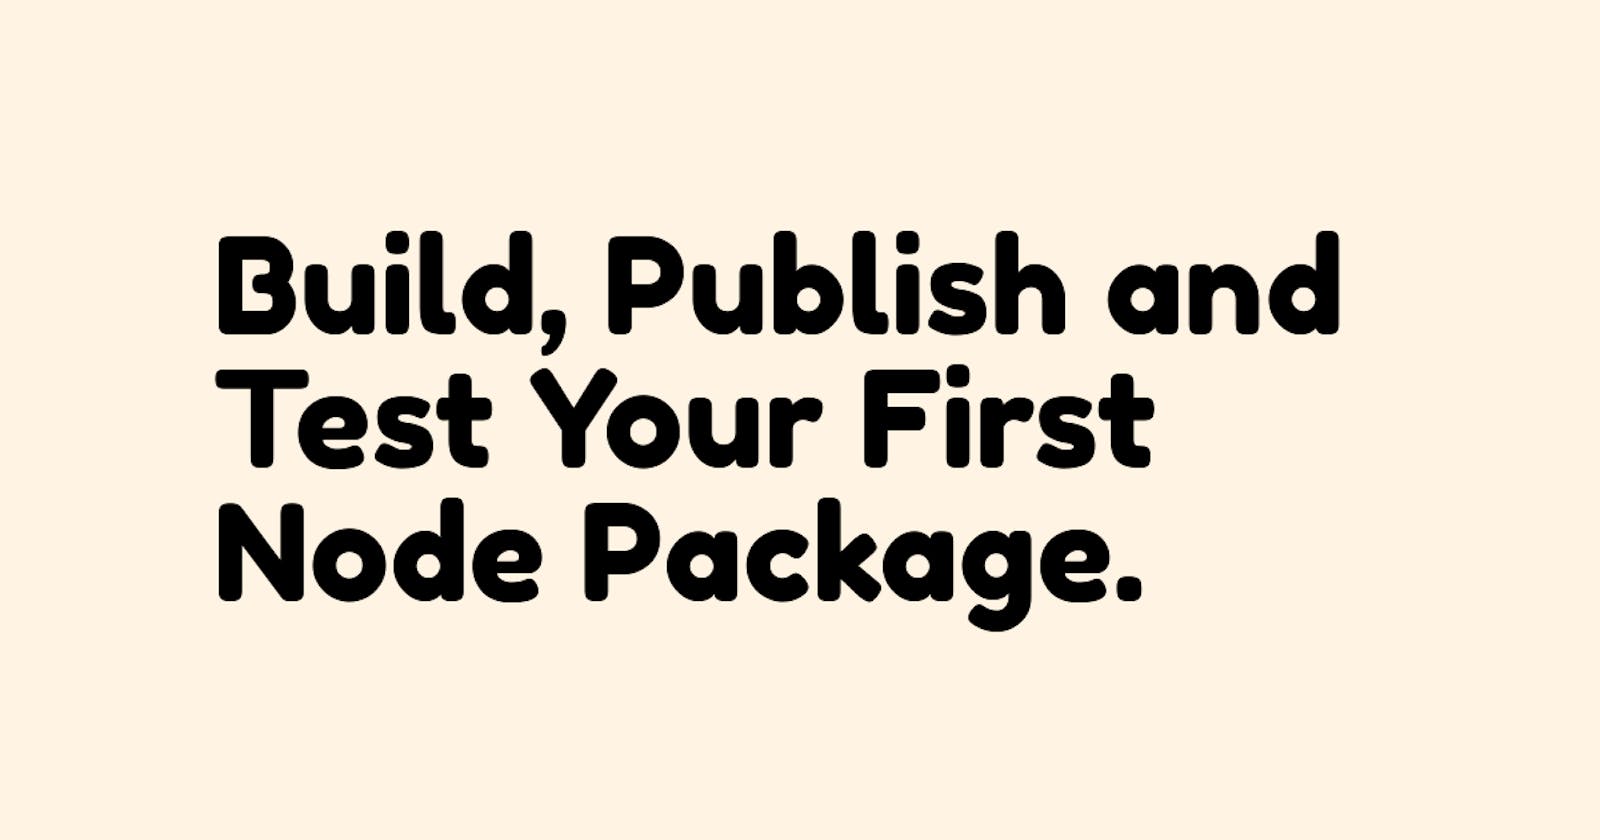 Build and Publish your first NPM package in less than 5 minutes!!!